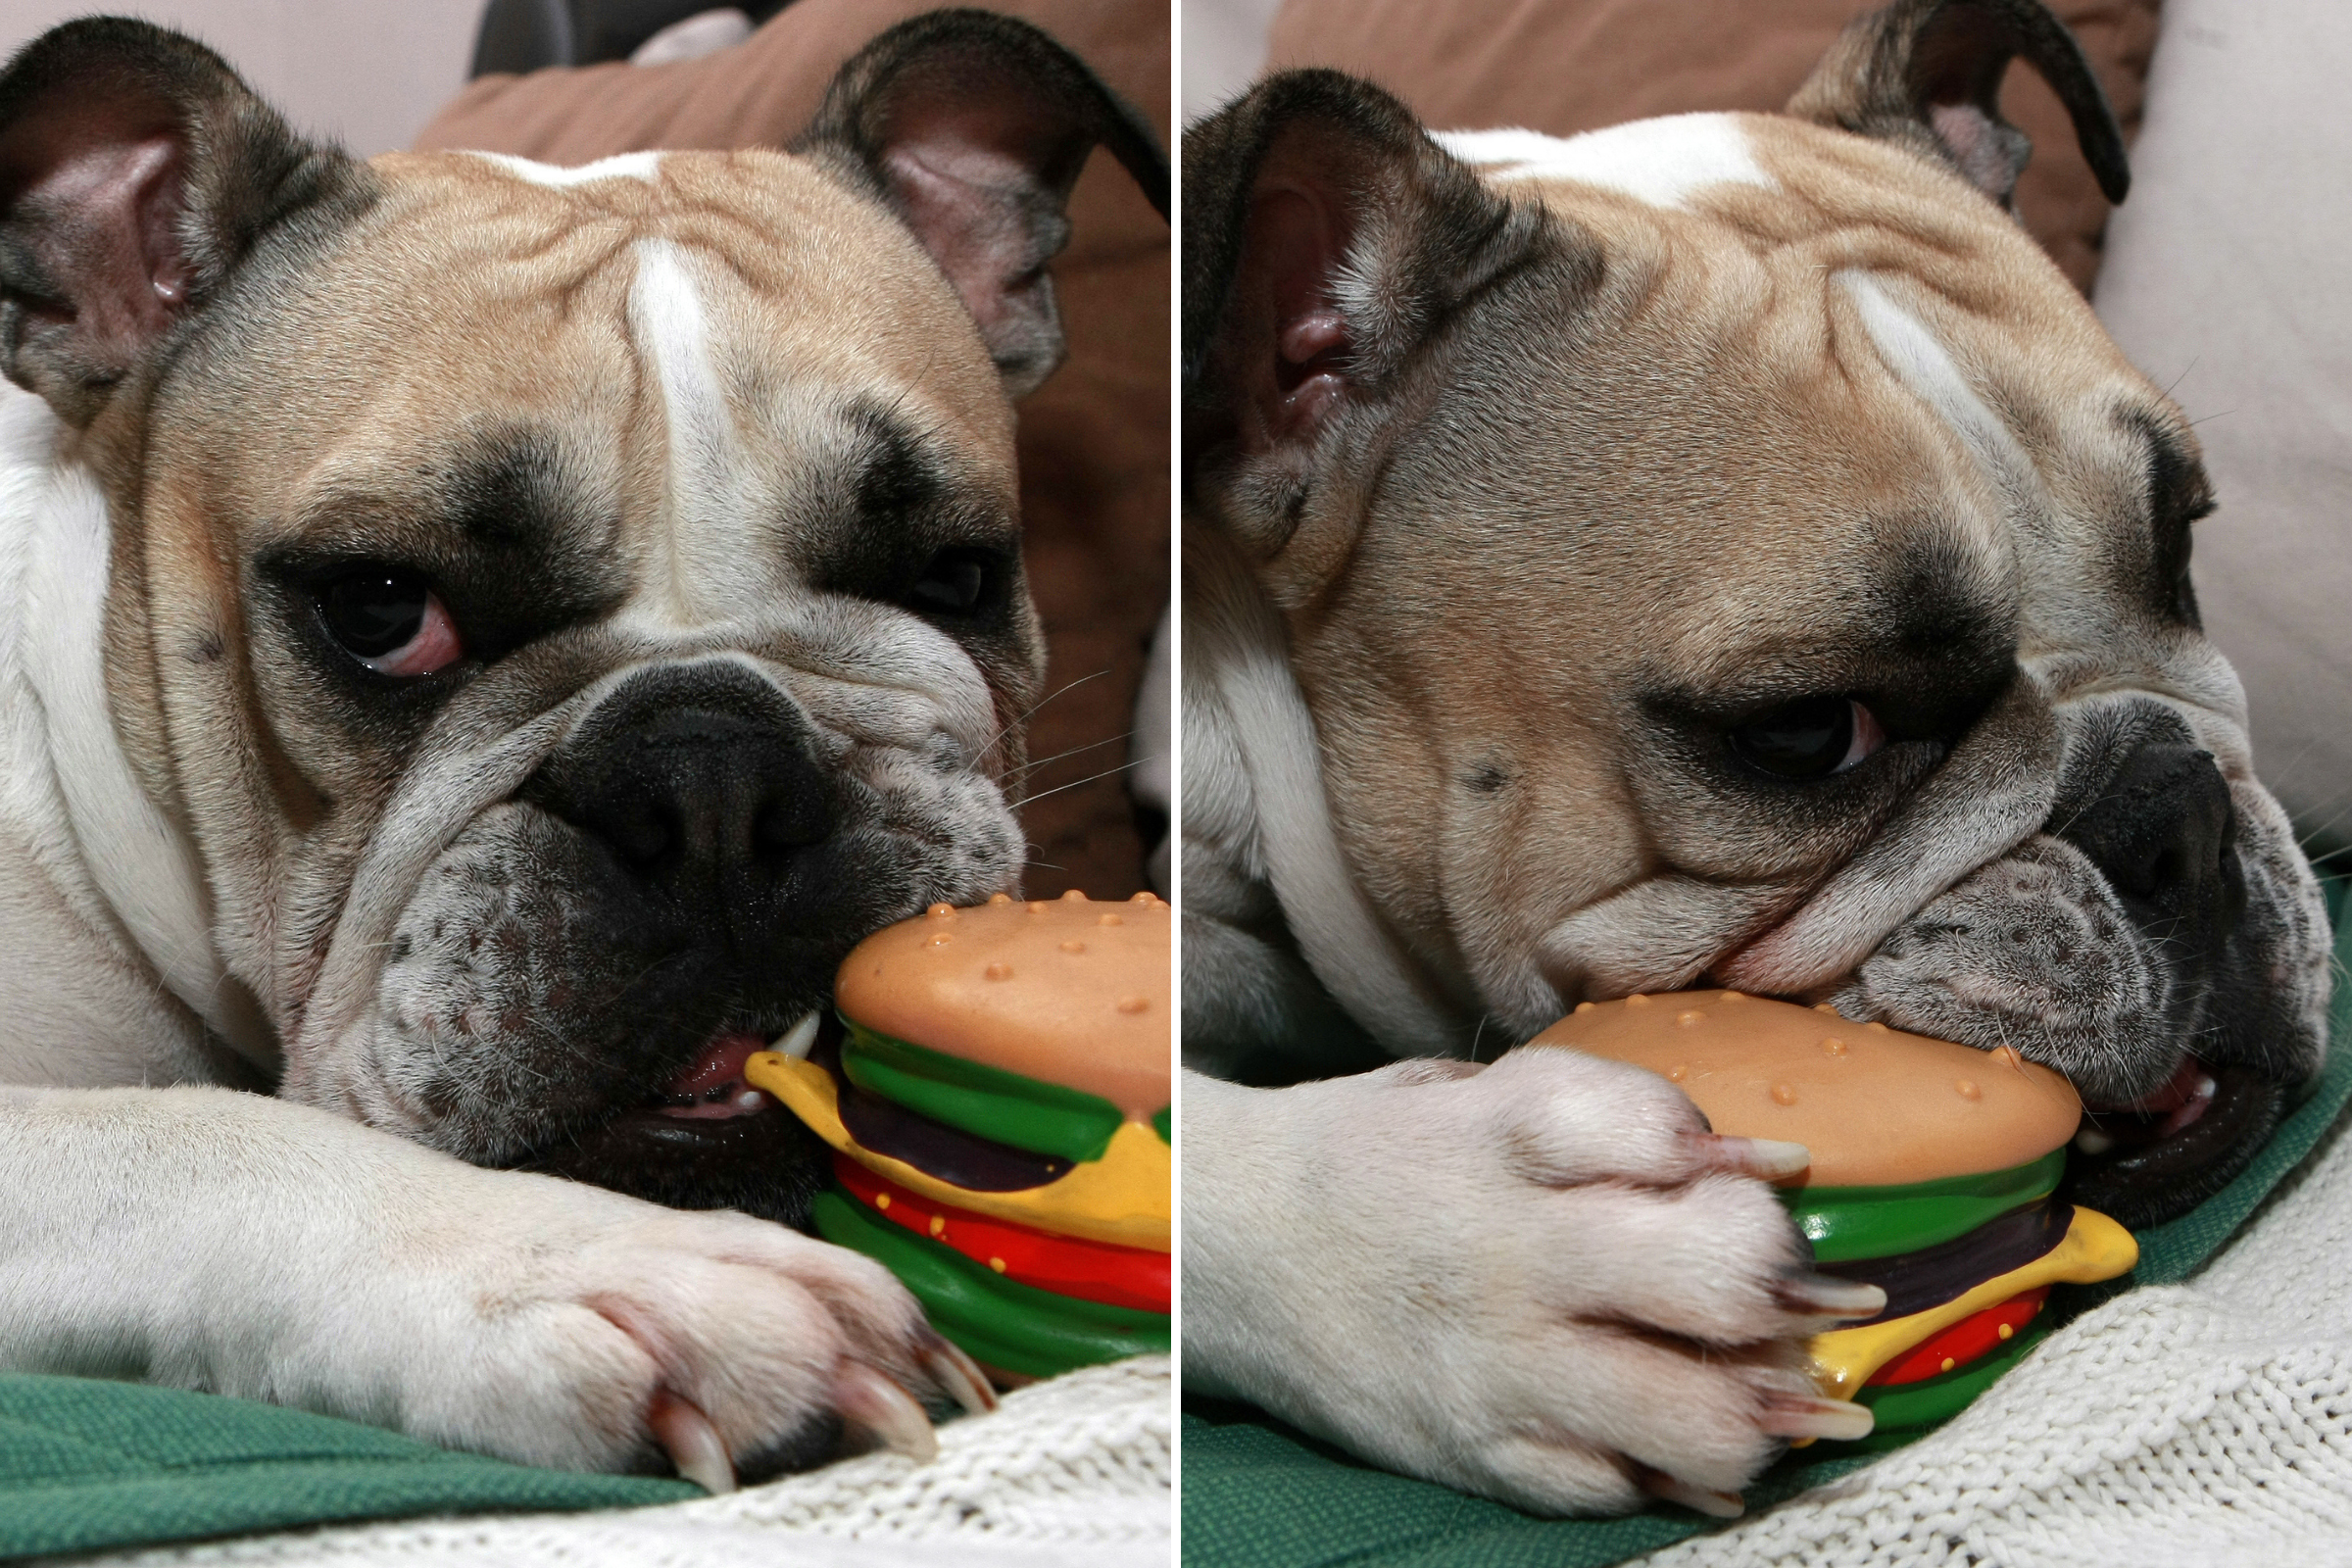 Internet Obsessed With Dog Who Can’t Get Enough of McDonald’s: ‘The Cheese’